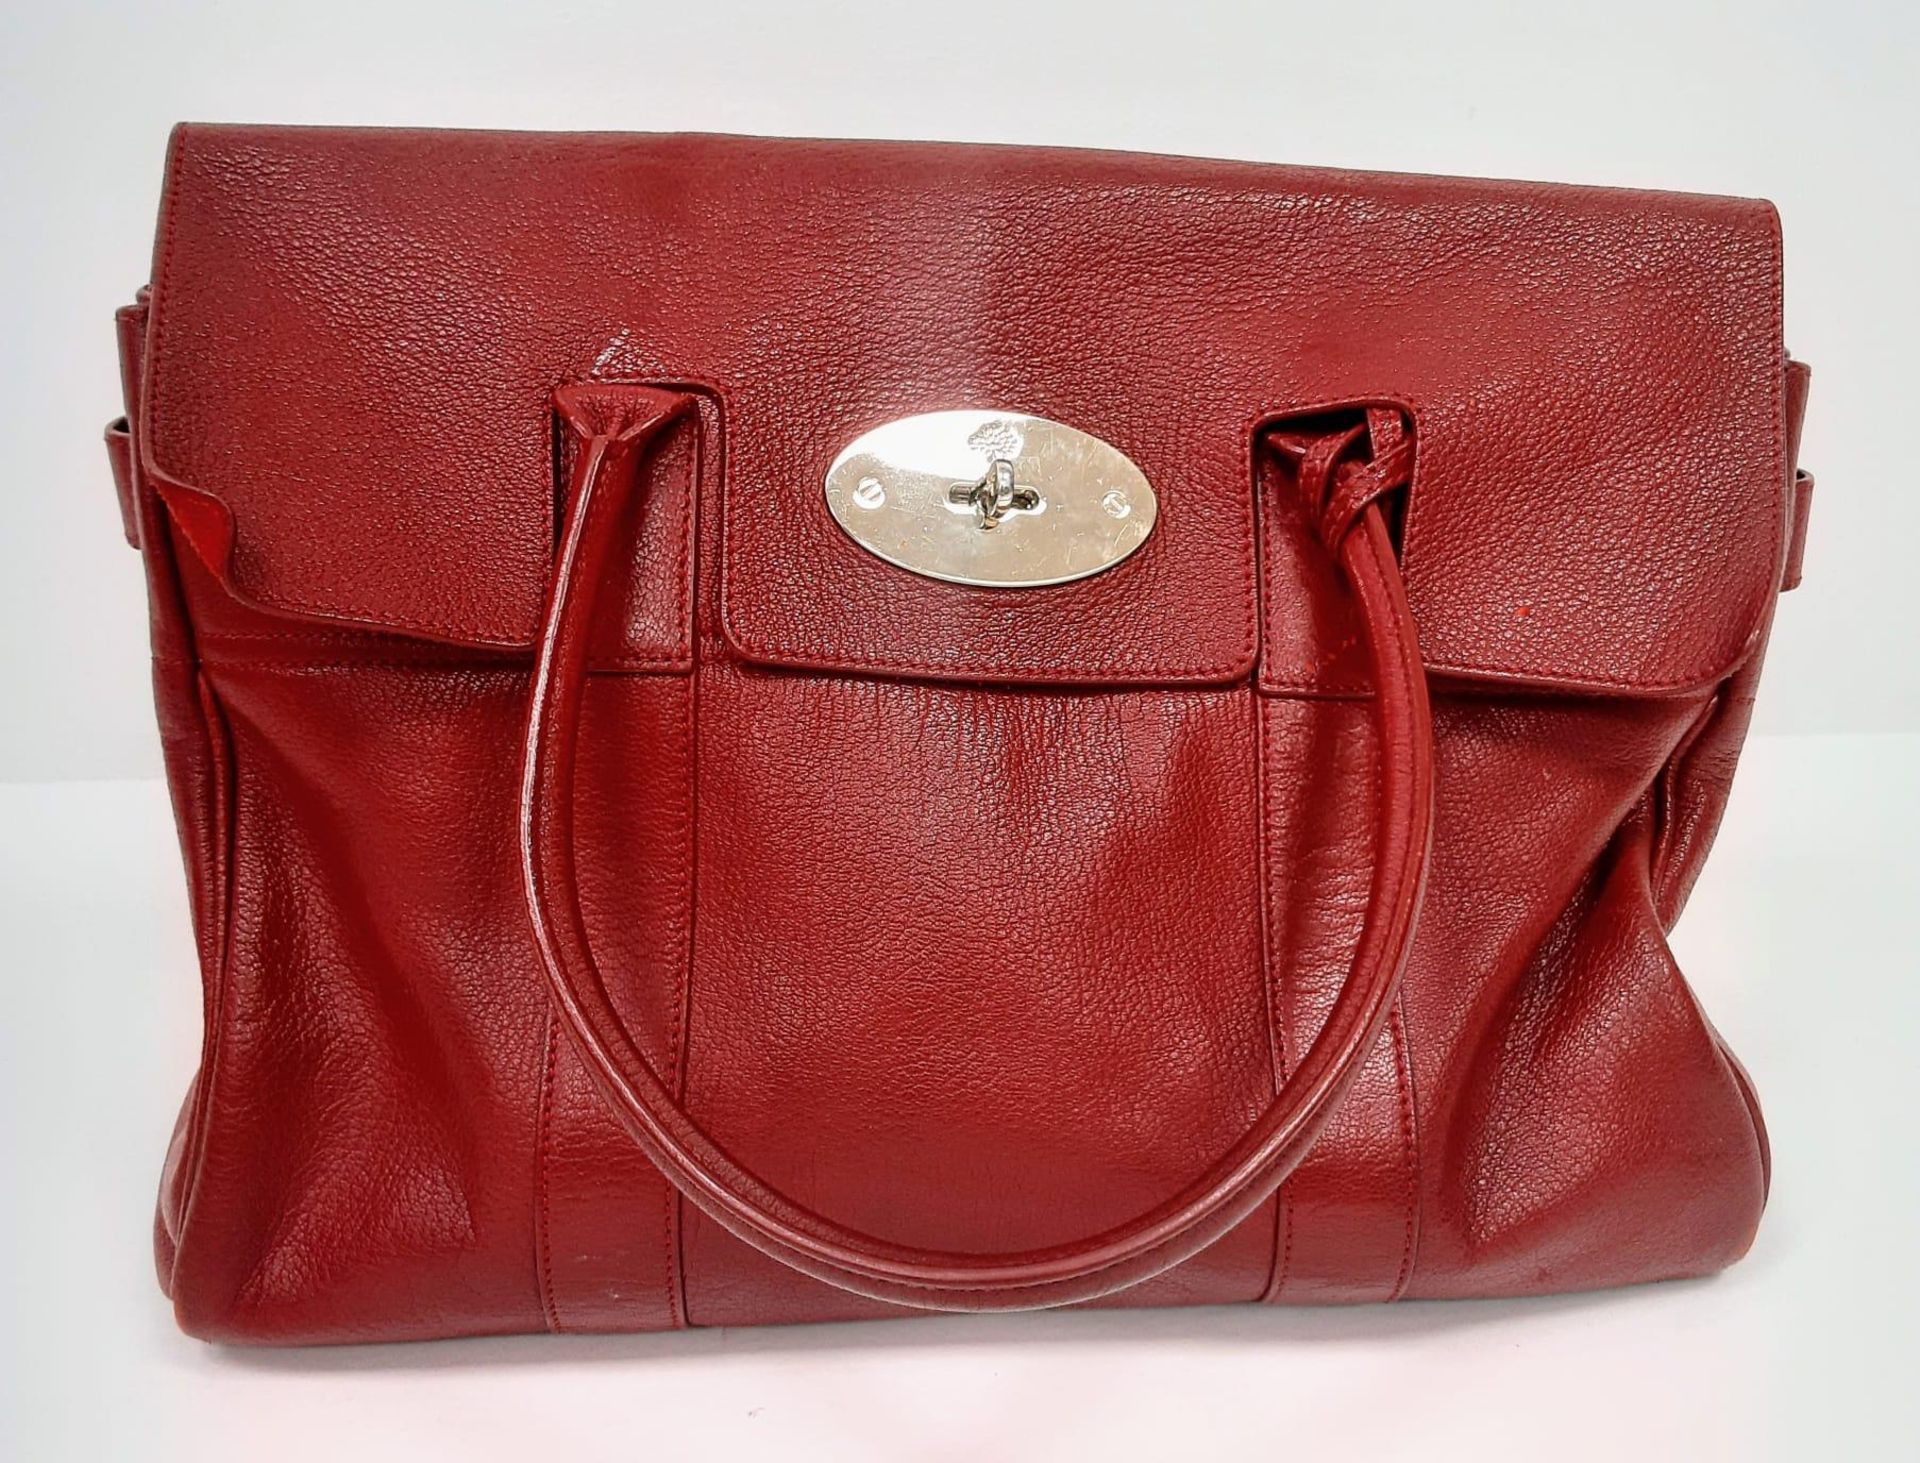 Mulberry Bayswater Red Bag. Classic grain patterning in quality leather. Gold tone hardware. Great